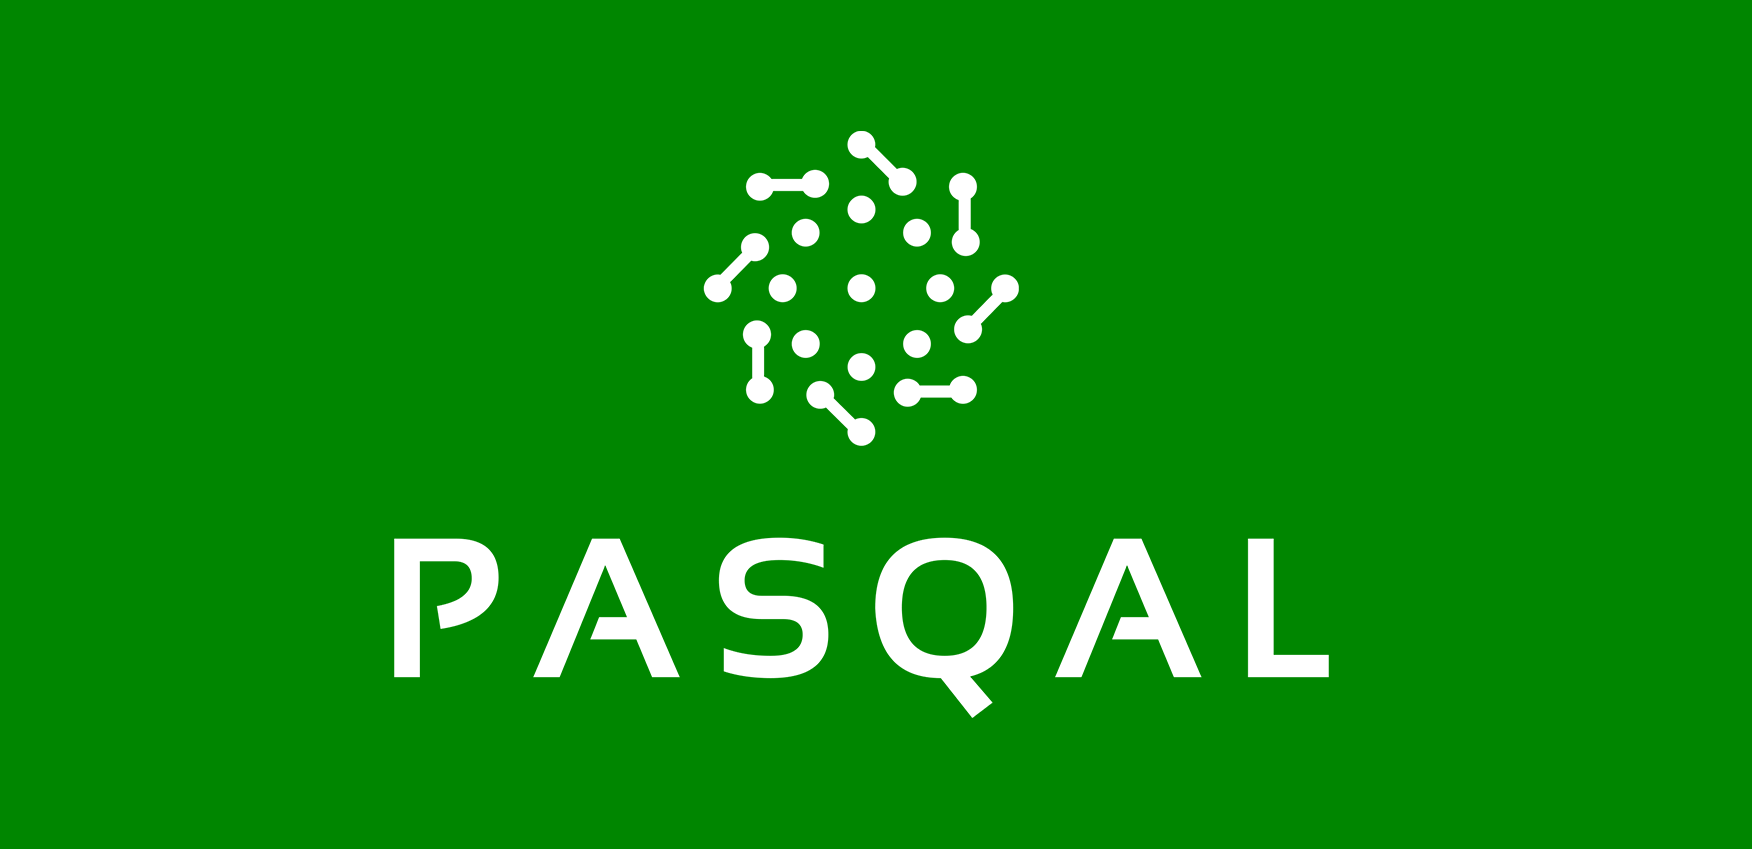 Pasqal And Basf Announce Partnership To Predict Weather Patterns Using Quantum Technology